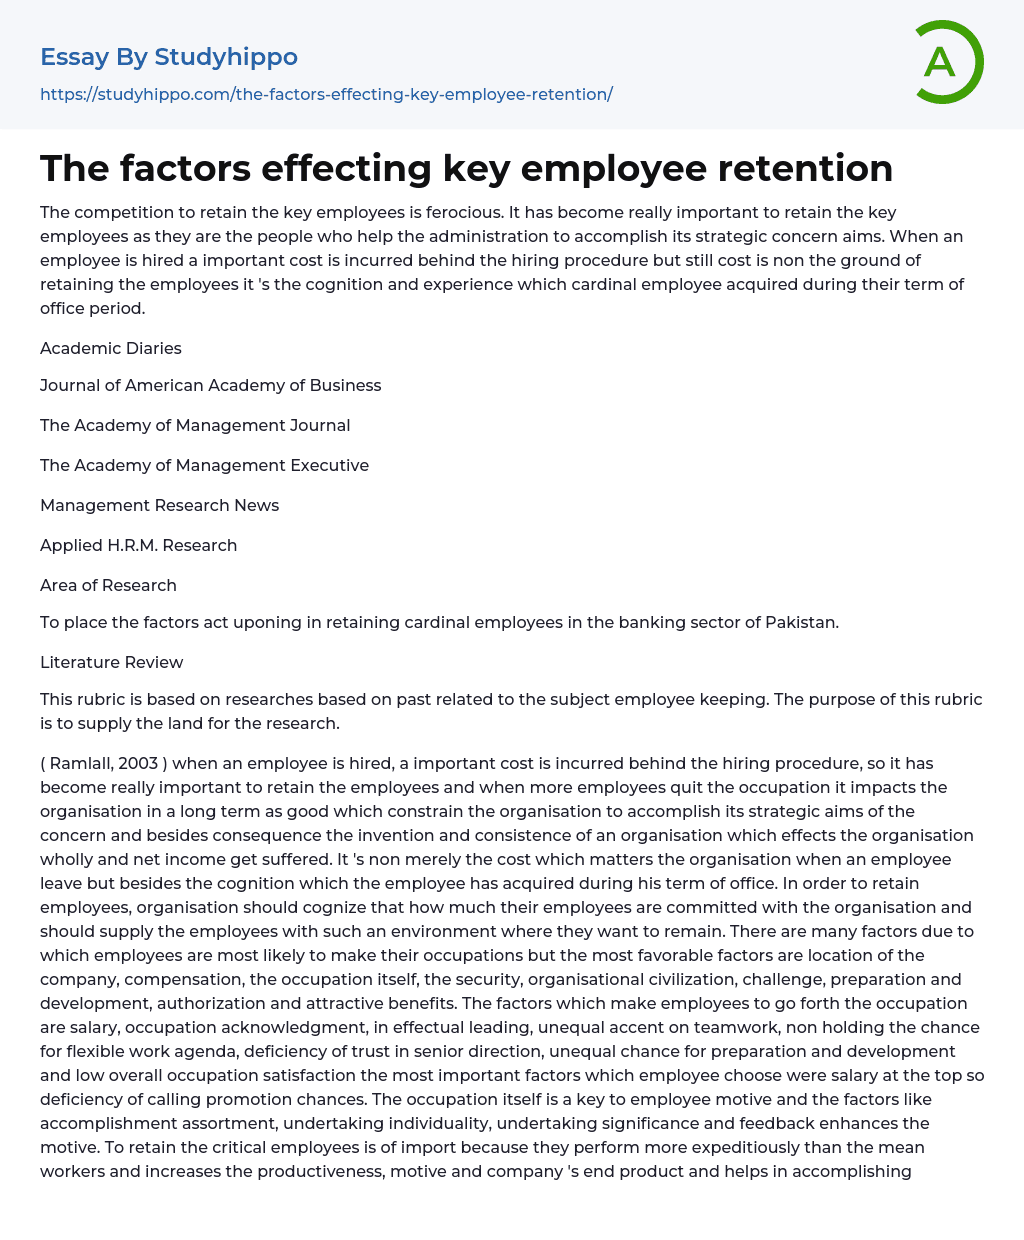 employee retention research paper conclusion